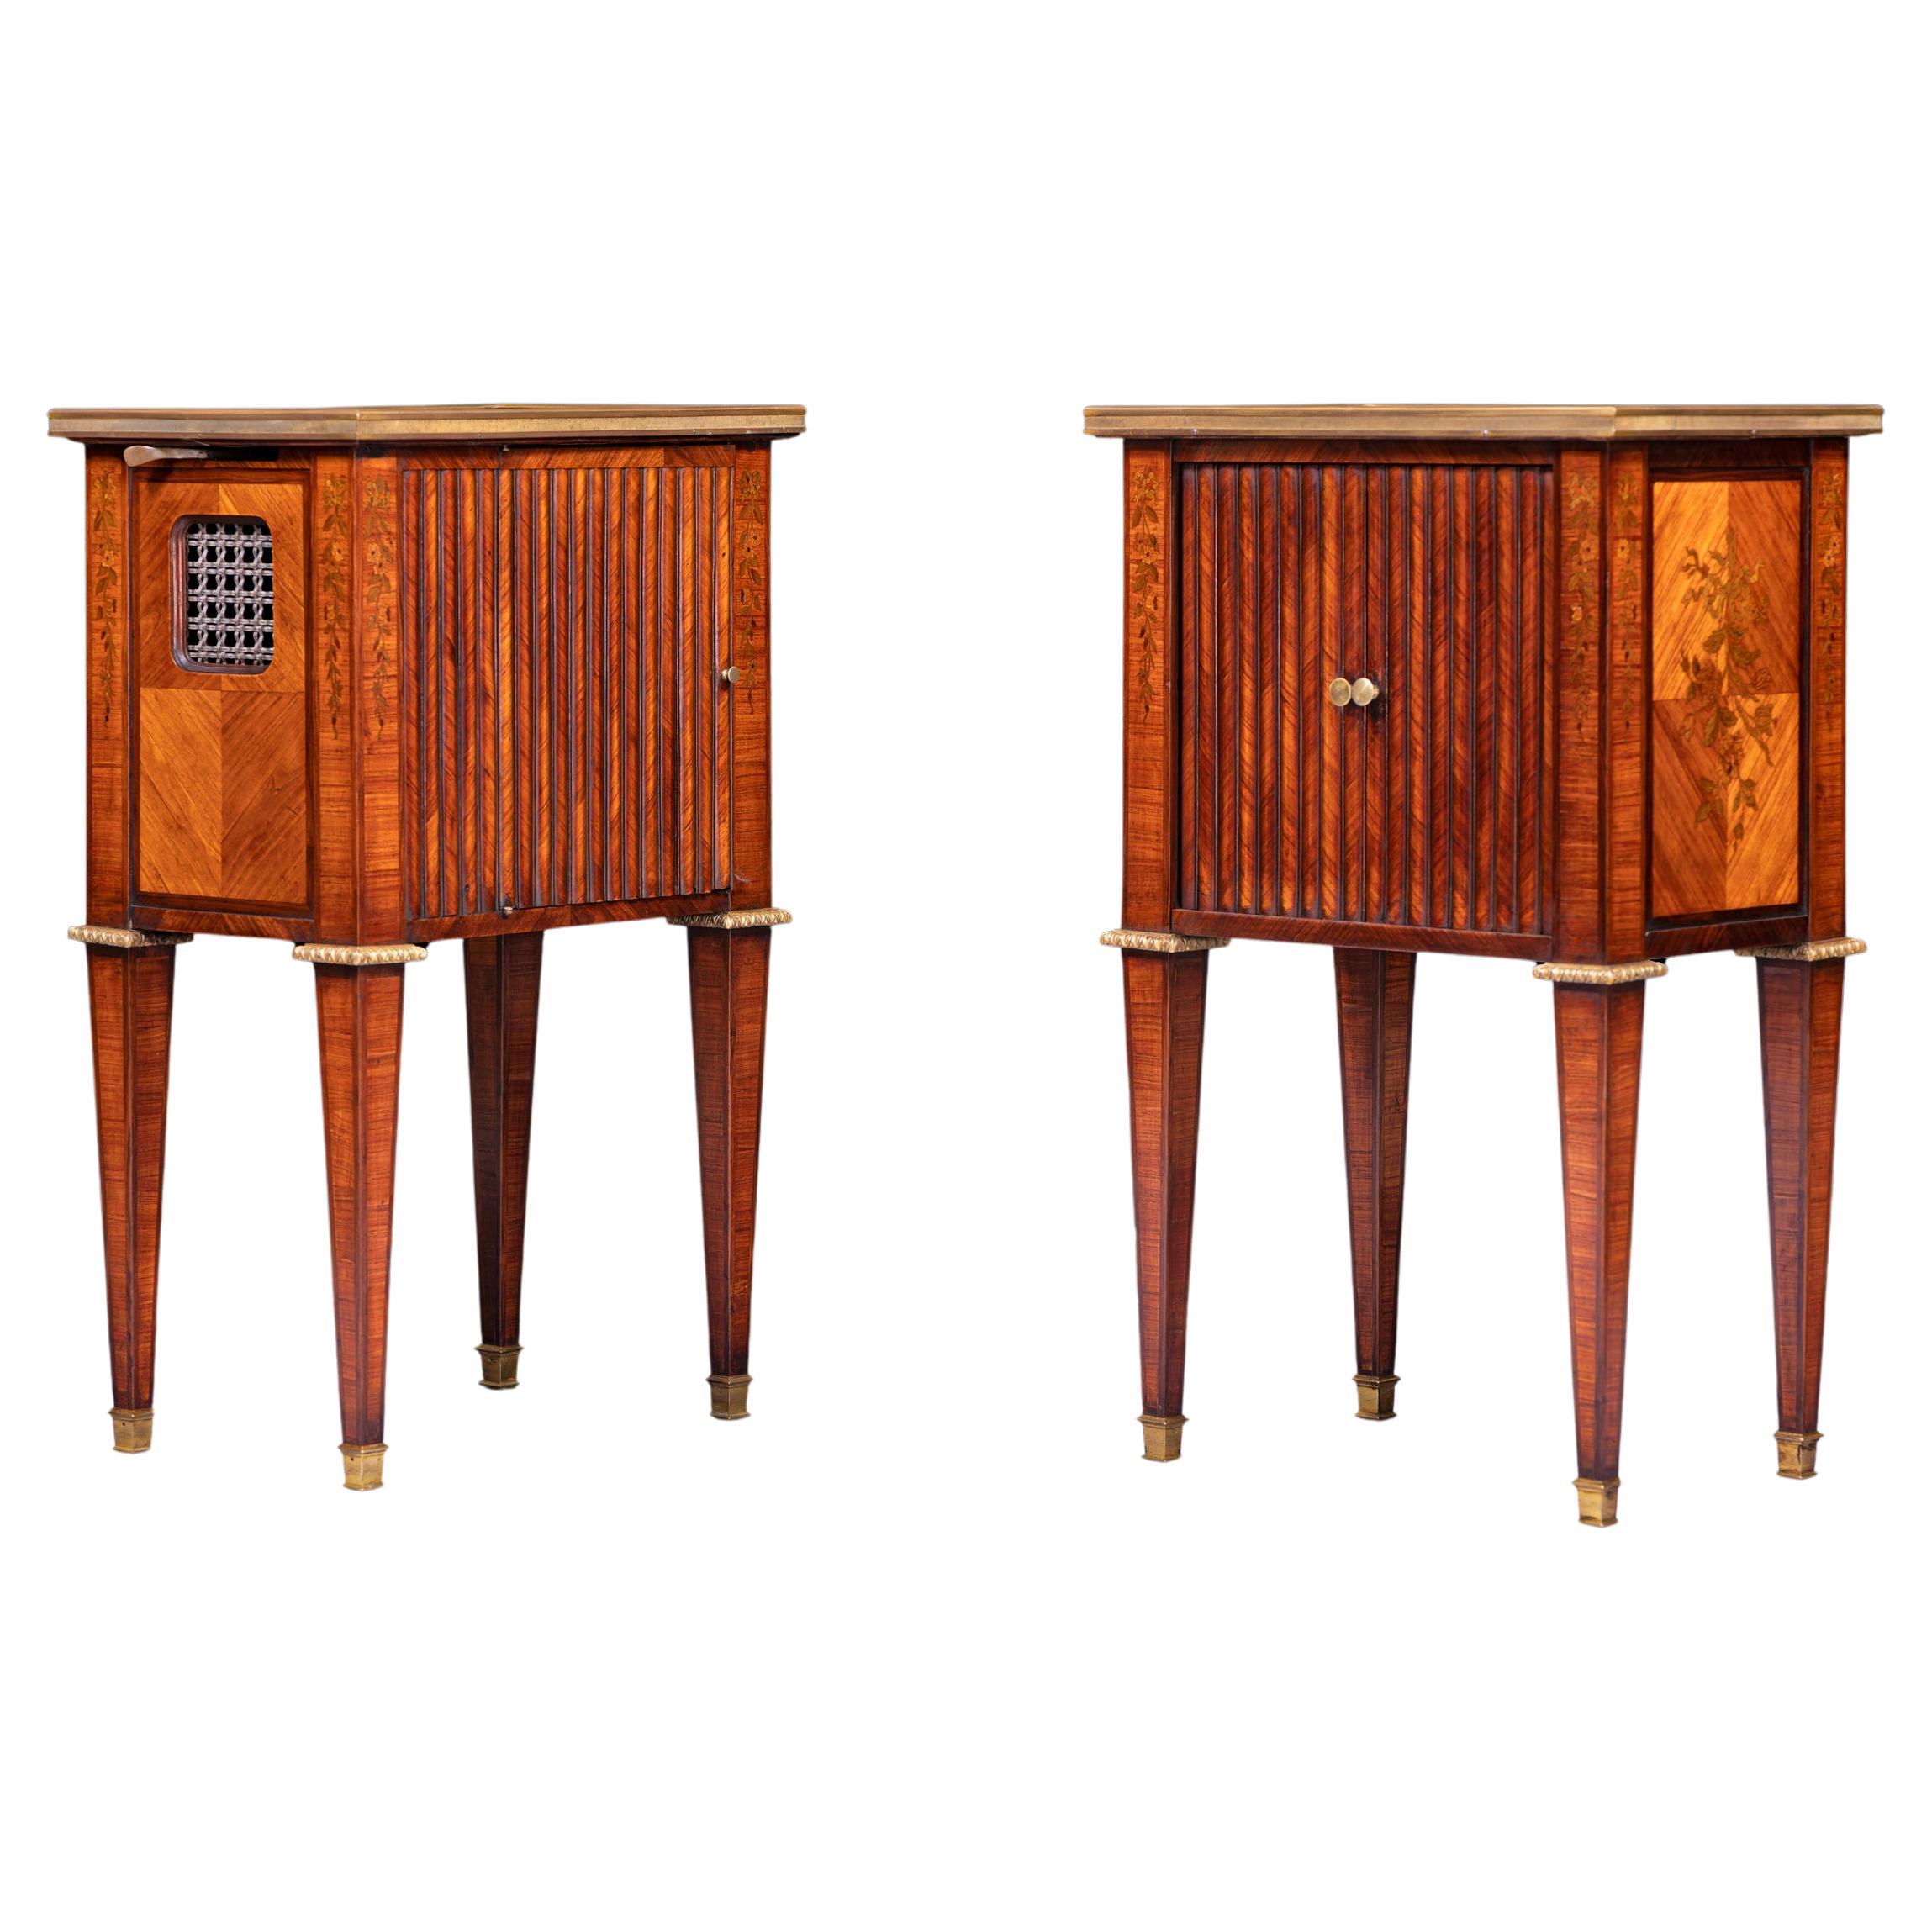 Pair of 19th Century French Kingwood & Ormolu Bedside Cabinets For Sale